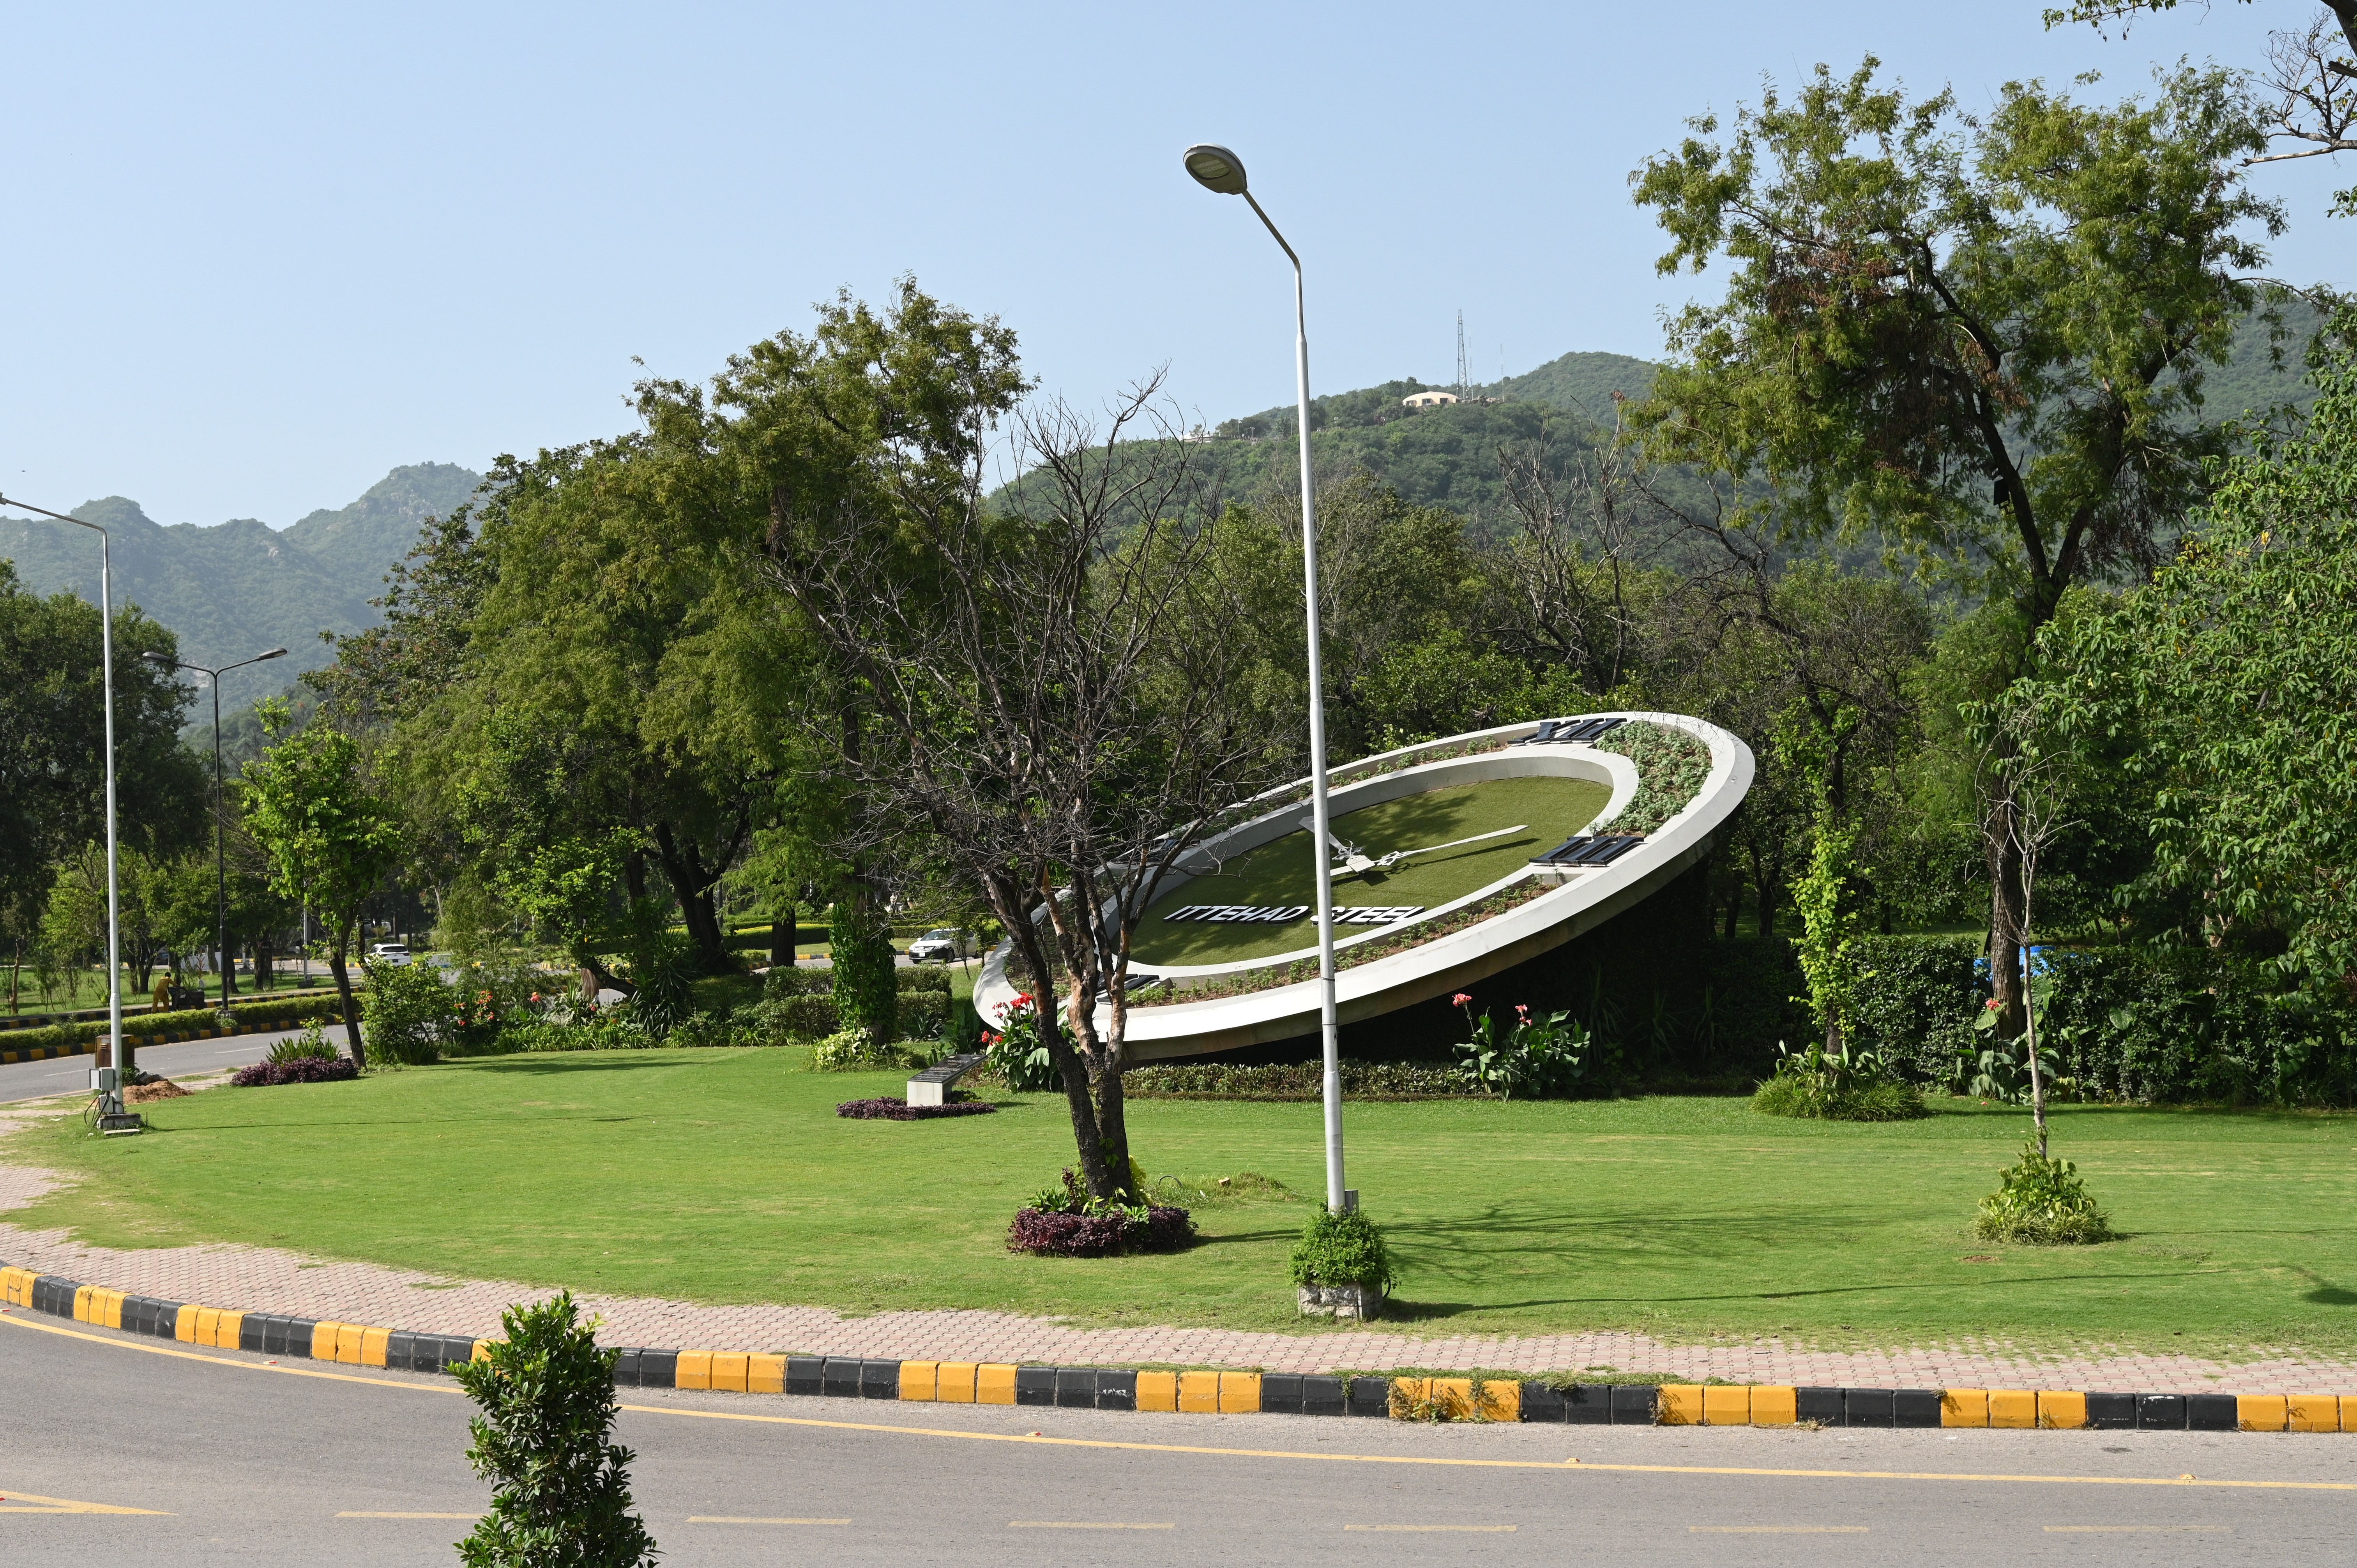 A floral clock islamabad made by ittehad Steel industries